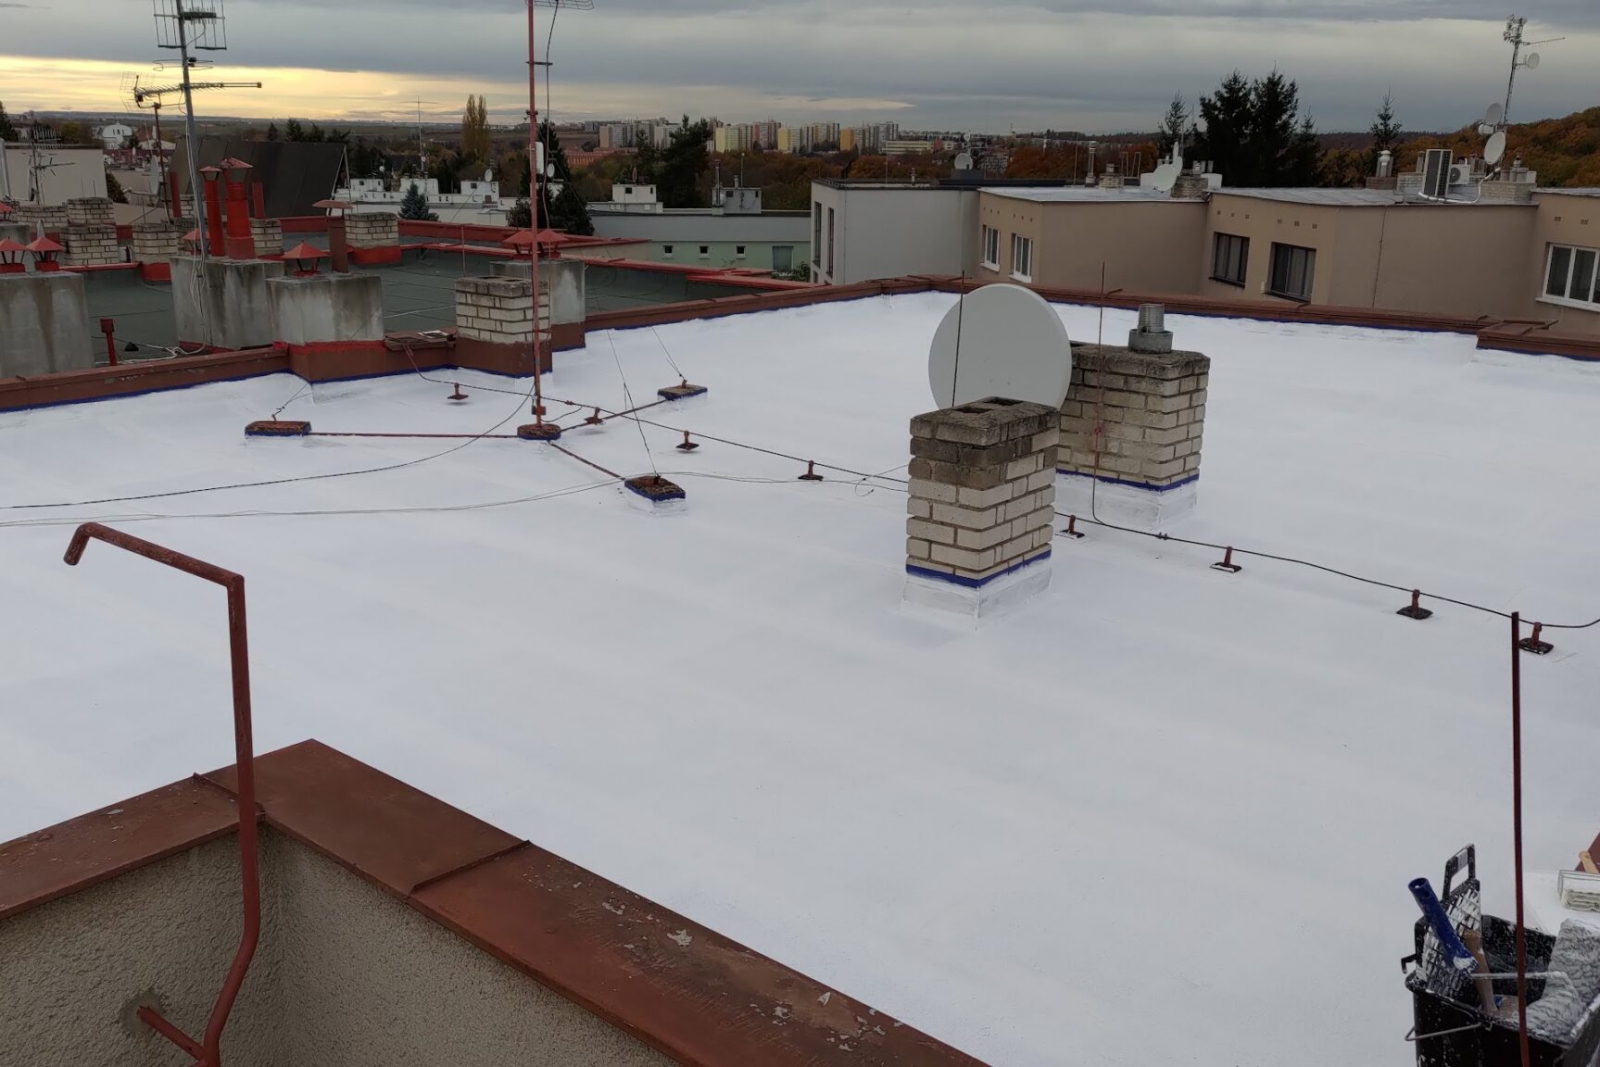 Roof insulation from asphalt insulation strips - ALPHA CZECH, Revolutionary reflective insulating coatings